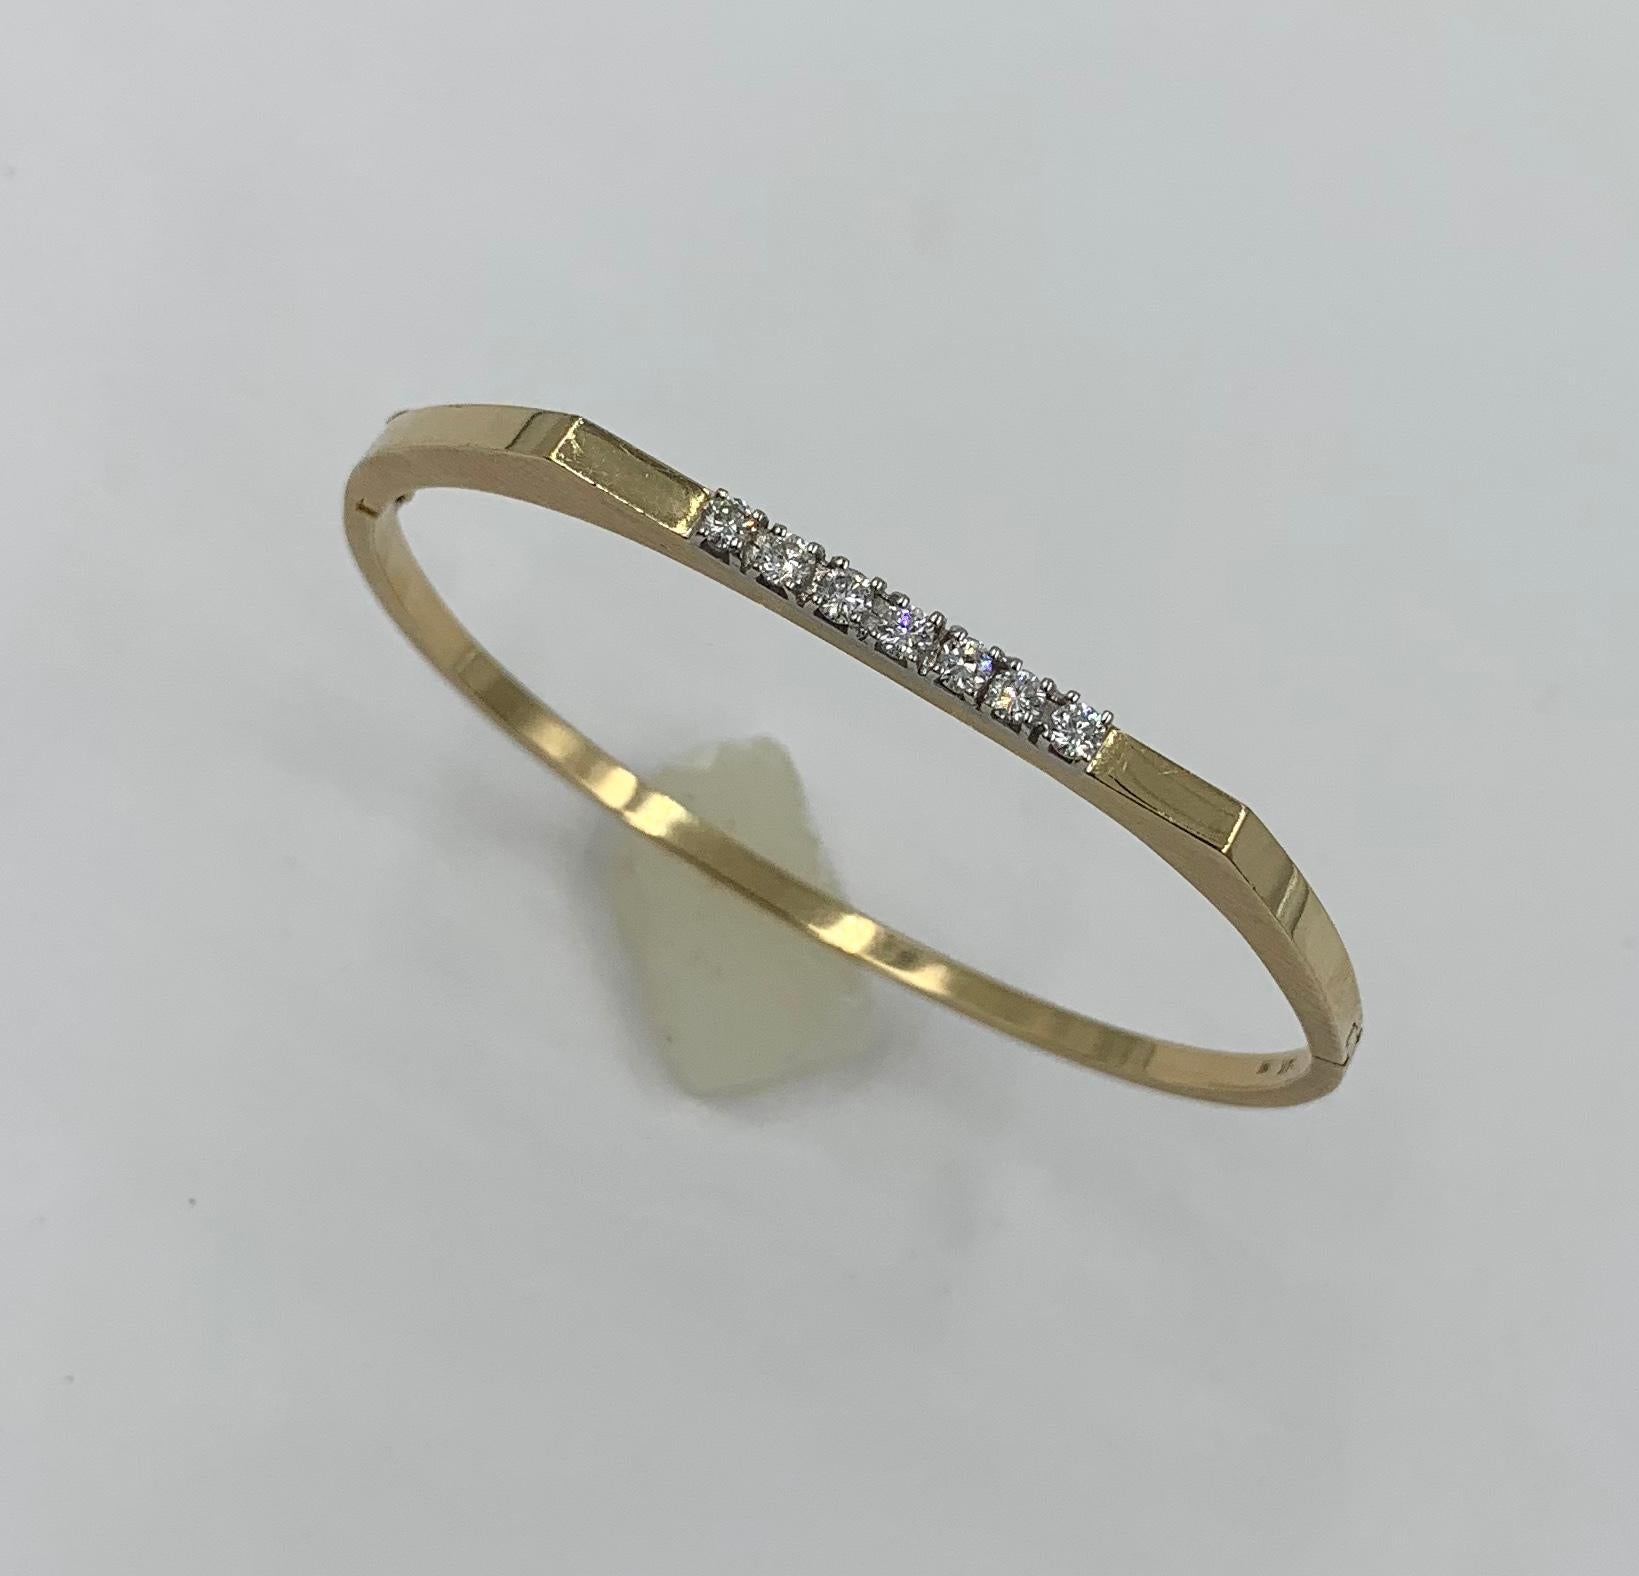 A wonderful and classic Mid-Century Modern Bangle Bracelet in 14 Karat Yellow Gold set with 7 sparkling white Diamonds.   The bracelet features 7 gorgeous white round brilliant cut diamonds which total approximately .56 Carats.  The diamonds are